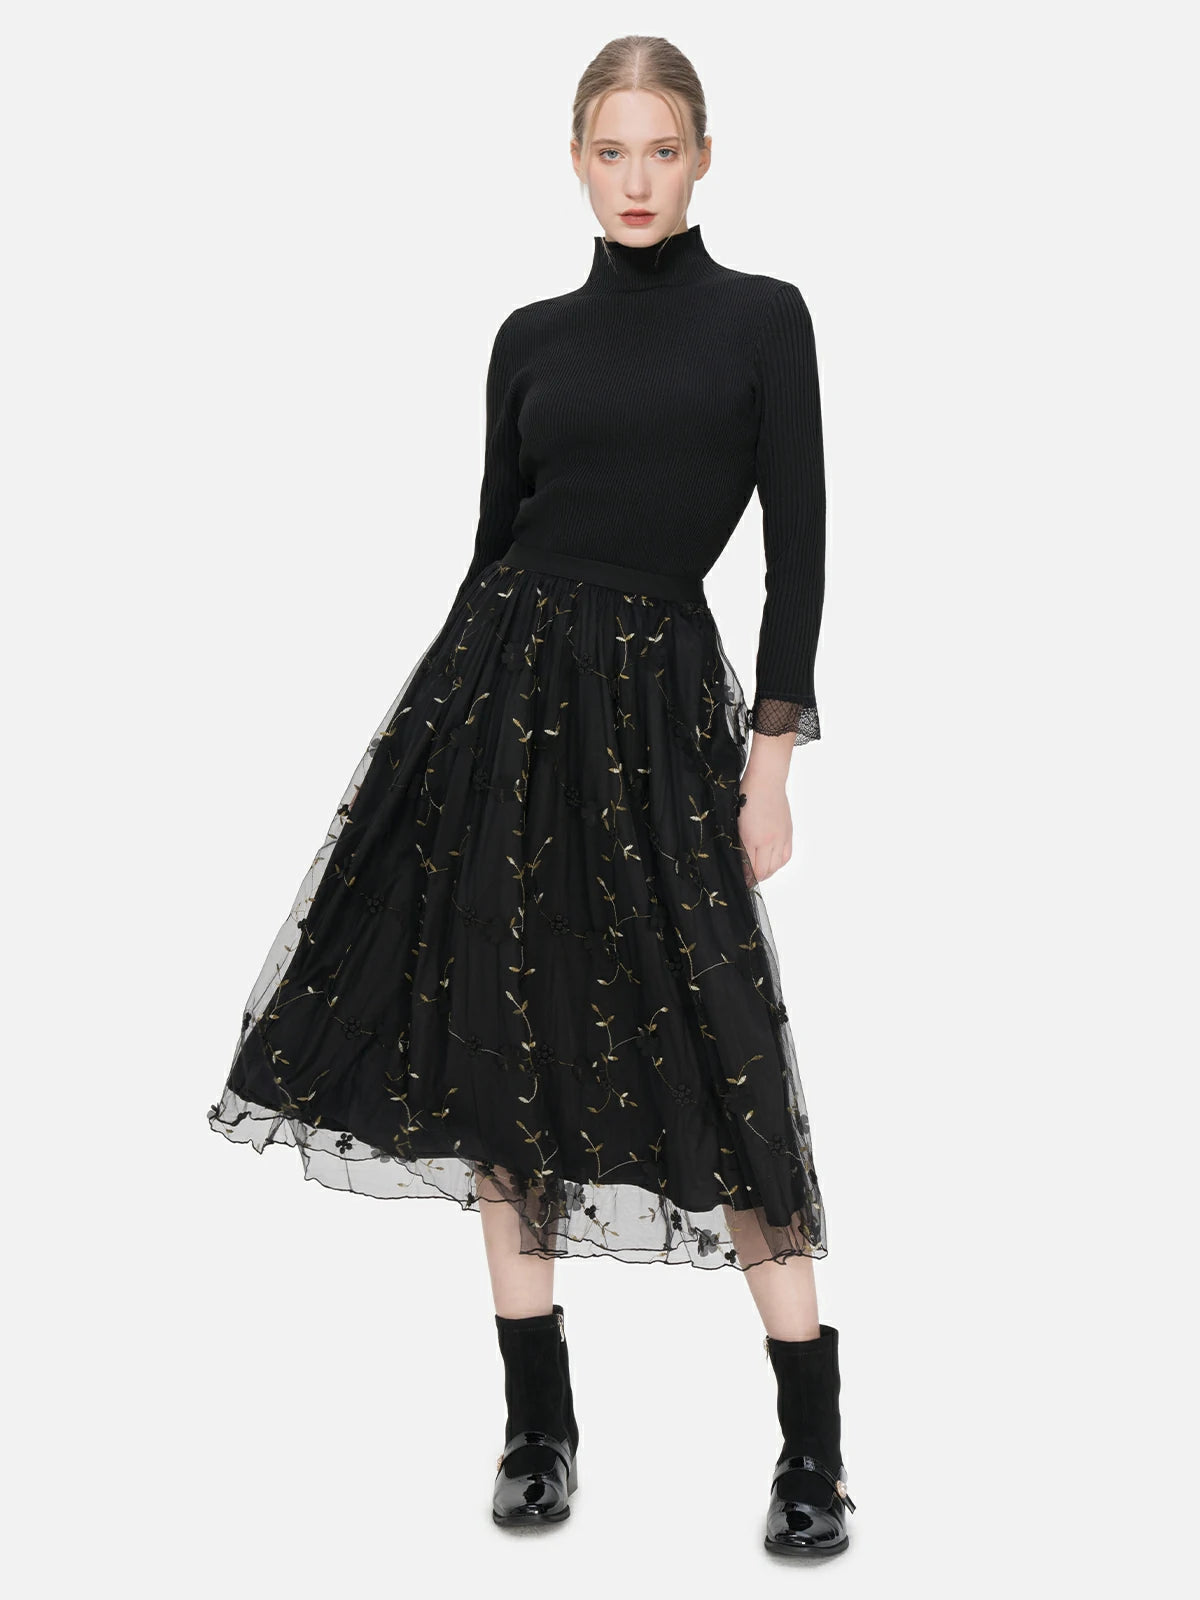 High-waisted midi tulle skirt with delicate embroidered leaf patterns and a comfortable high-elasticity waistband for a graceful and feminine silhouette.